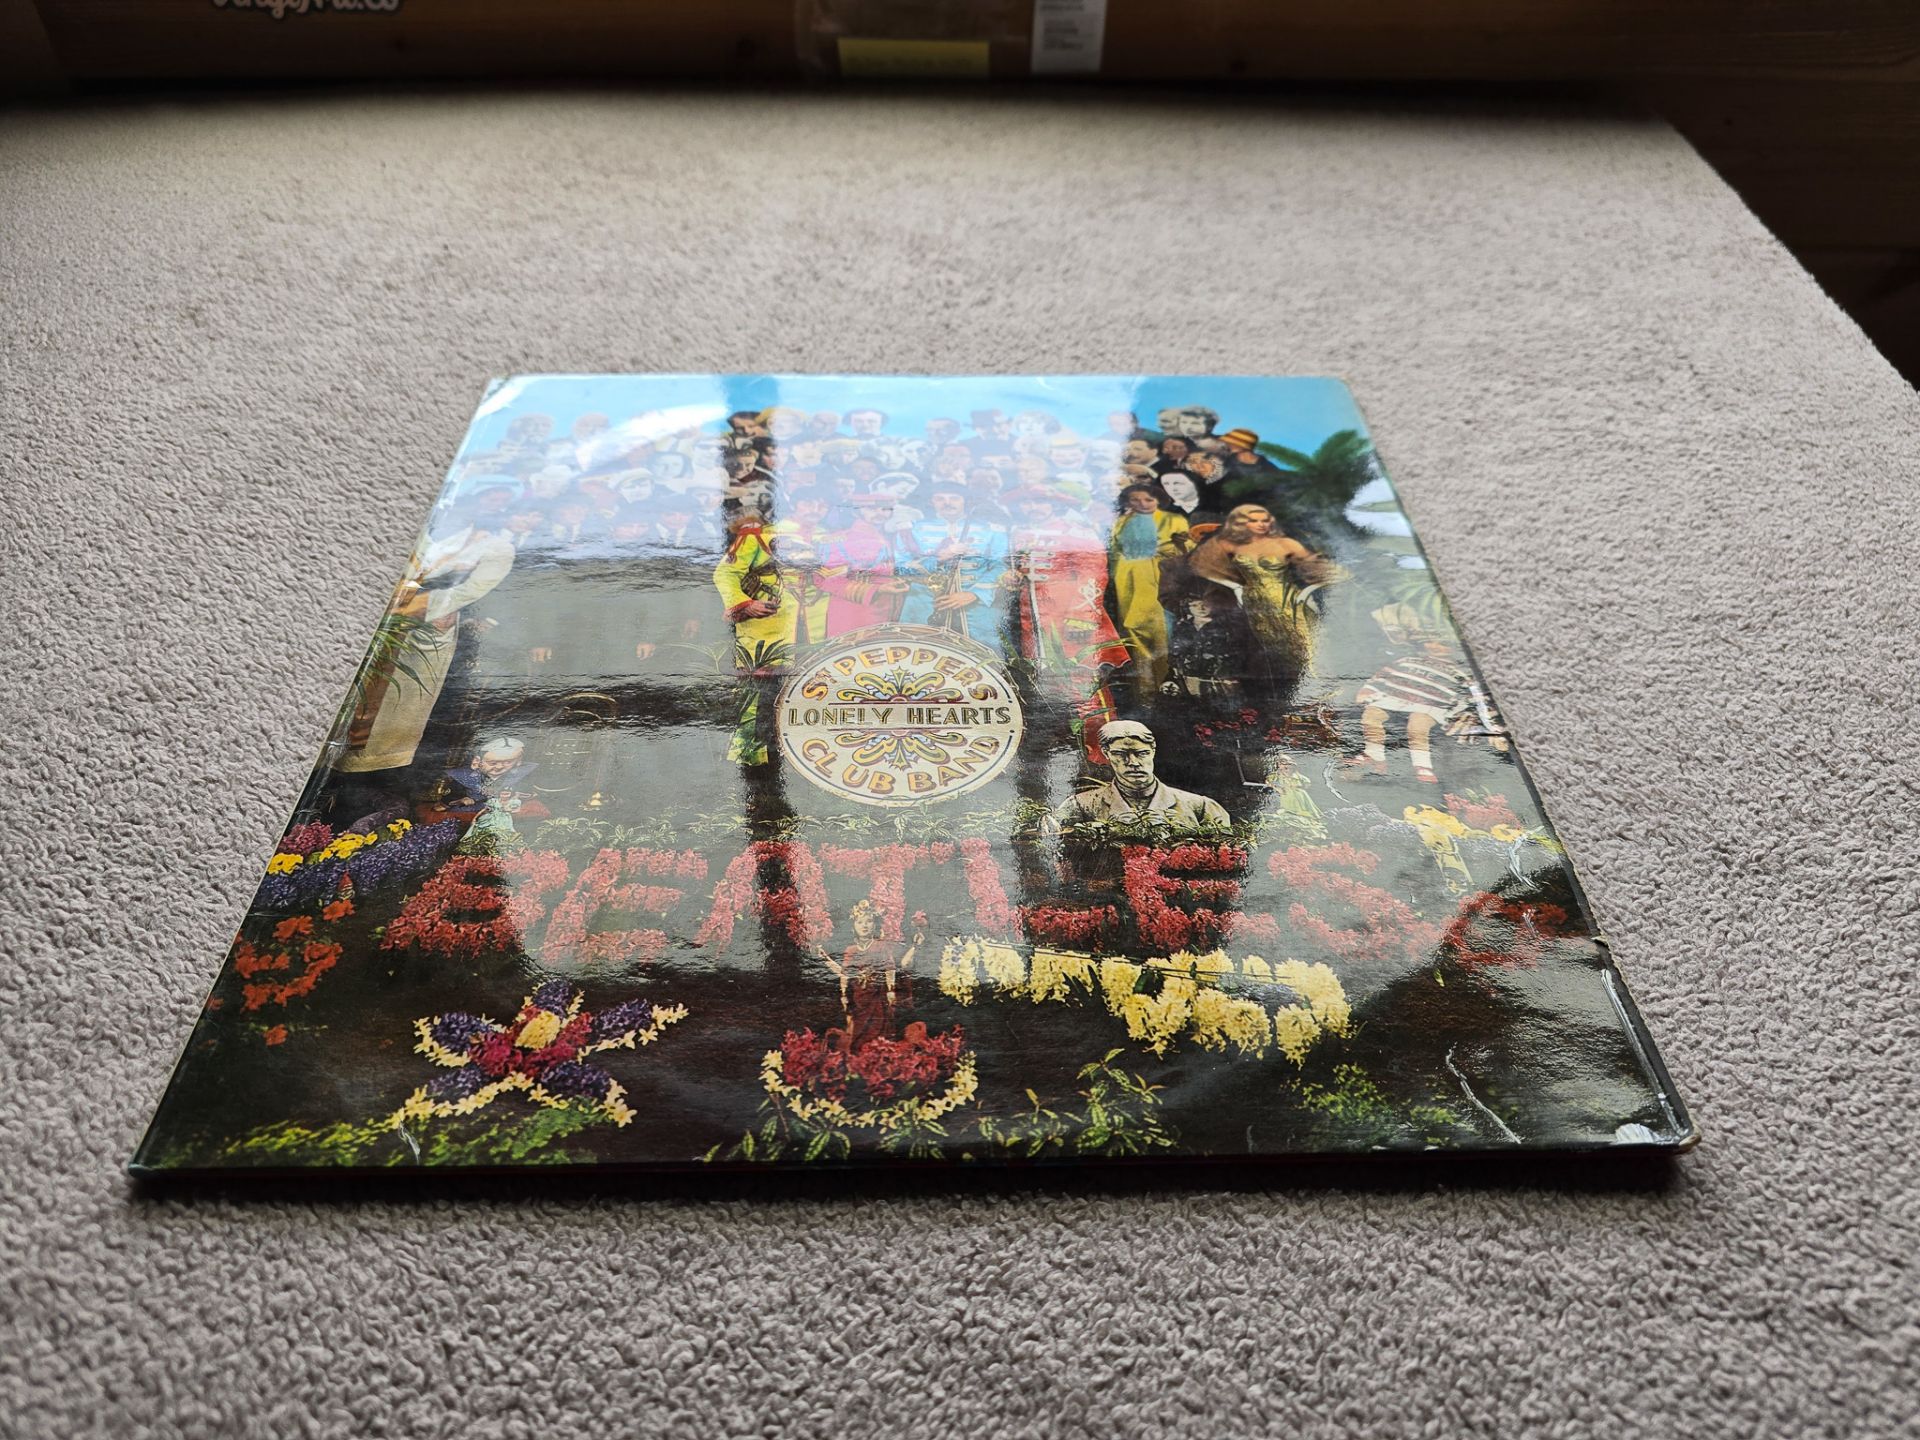 The Beatles – Sgt. Pepper's Lonely Hearts Club Band 1967 Stereo UK Vinyl LP - Image 2 of 9